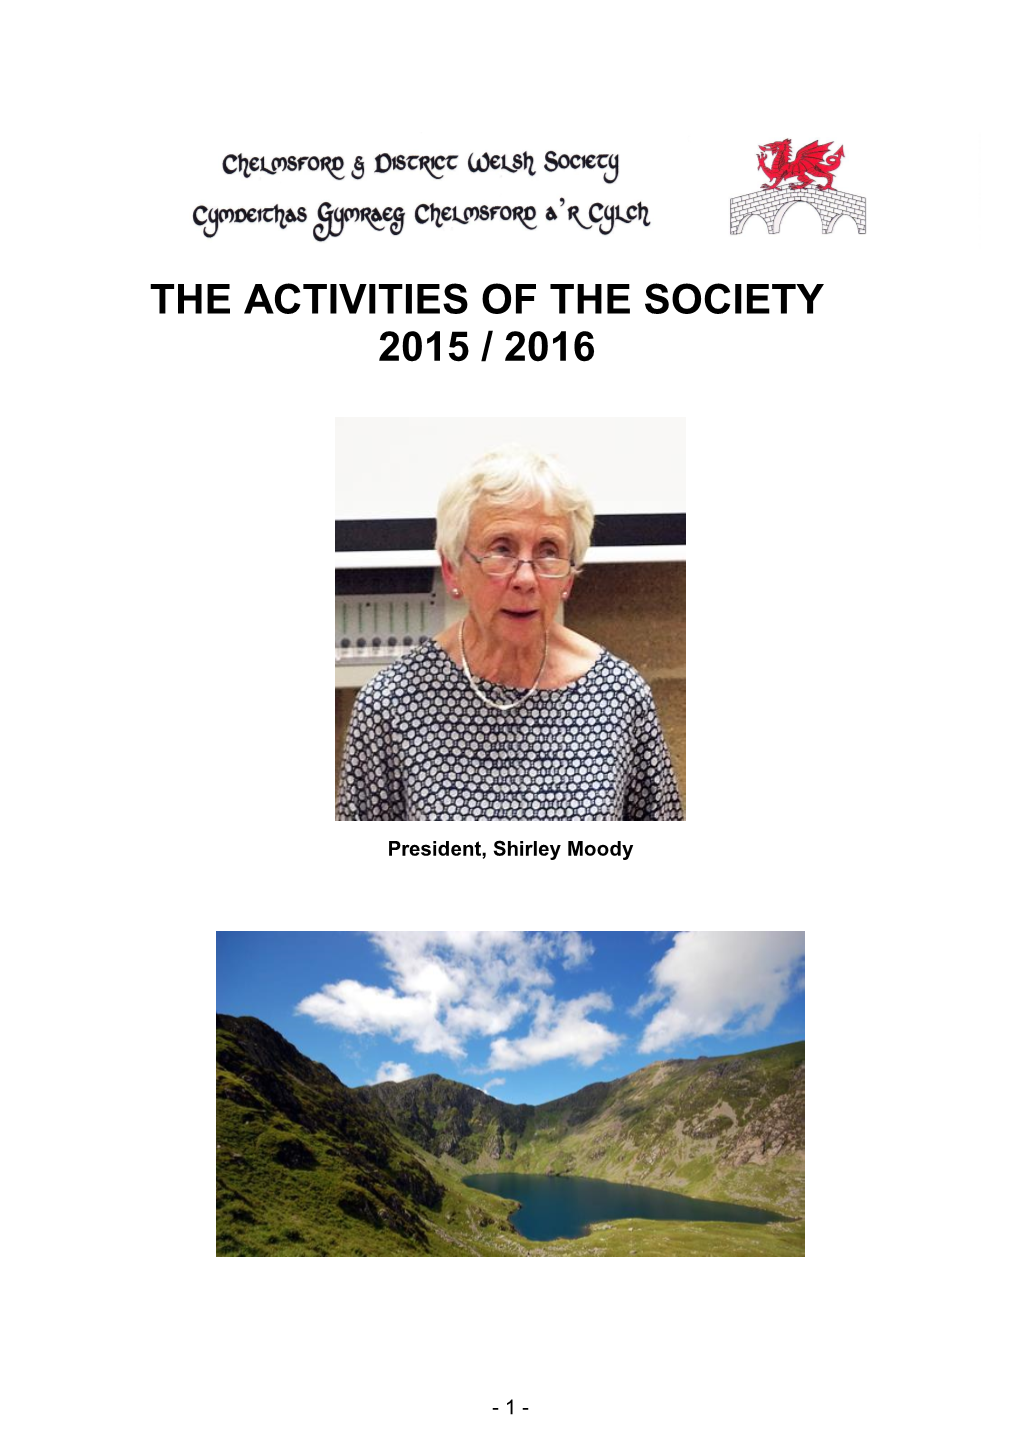 The Activities of the Society 2015 / 2016